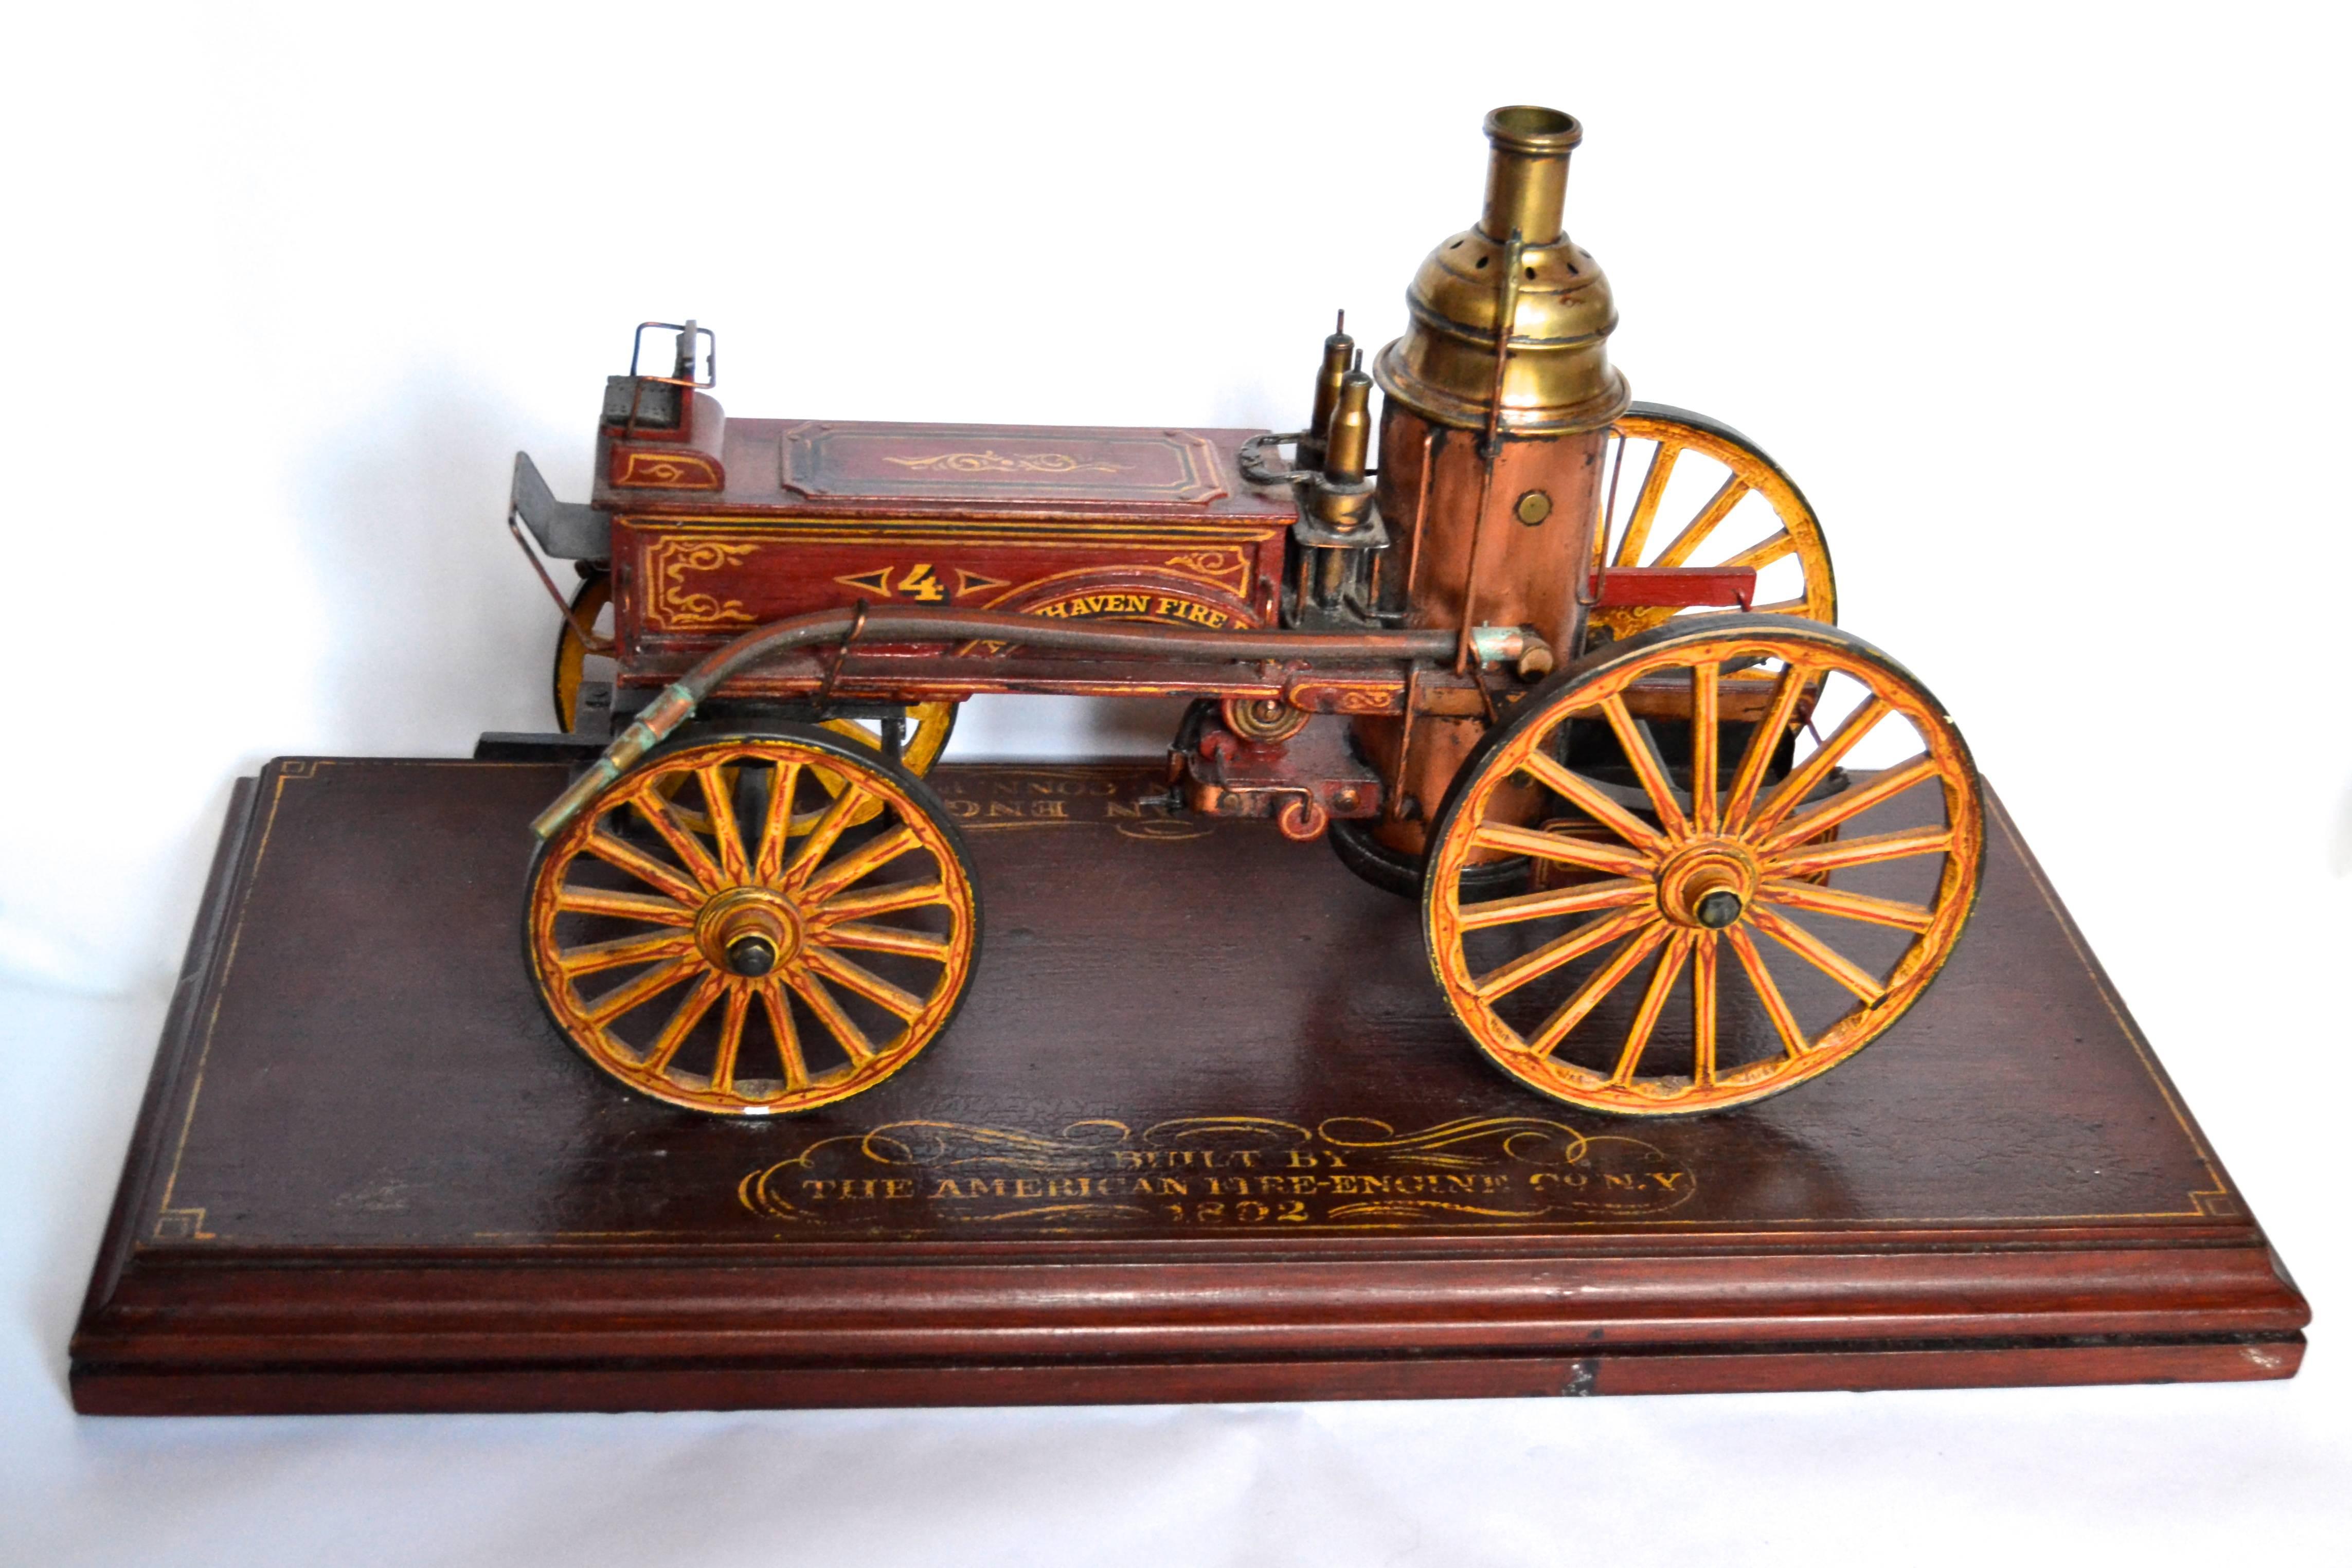 Elaborately detailed handcrafted model of a firefighting Apparatus identified as 
"Columbian Engine New Haven CT F.D...Built by the American Fire Engine Co NY 1892". Lovingly constructed of polychromed wood, copper, steel and leather for